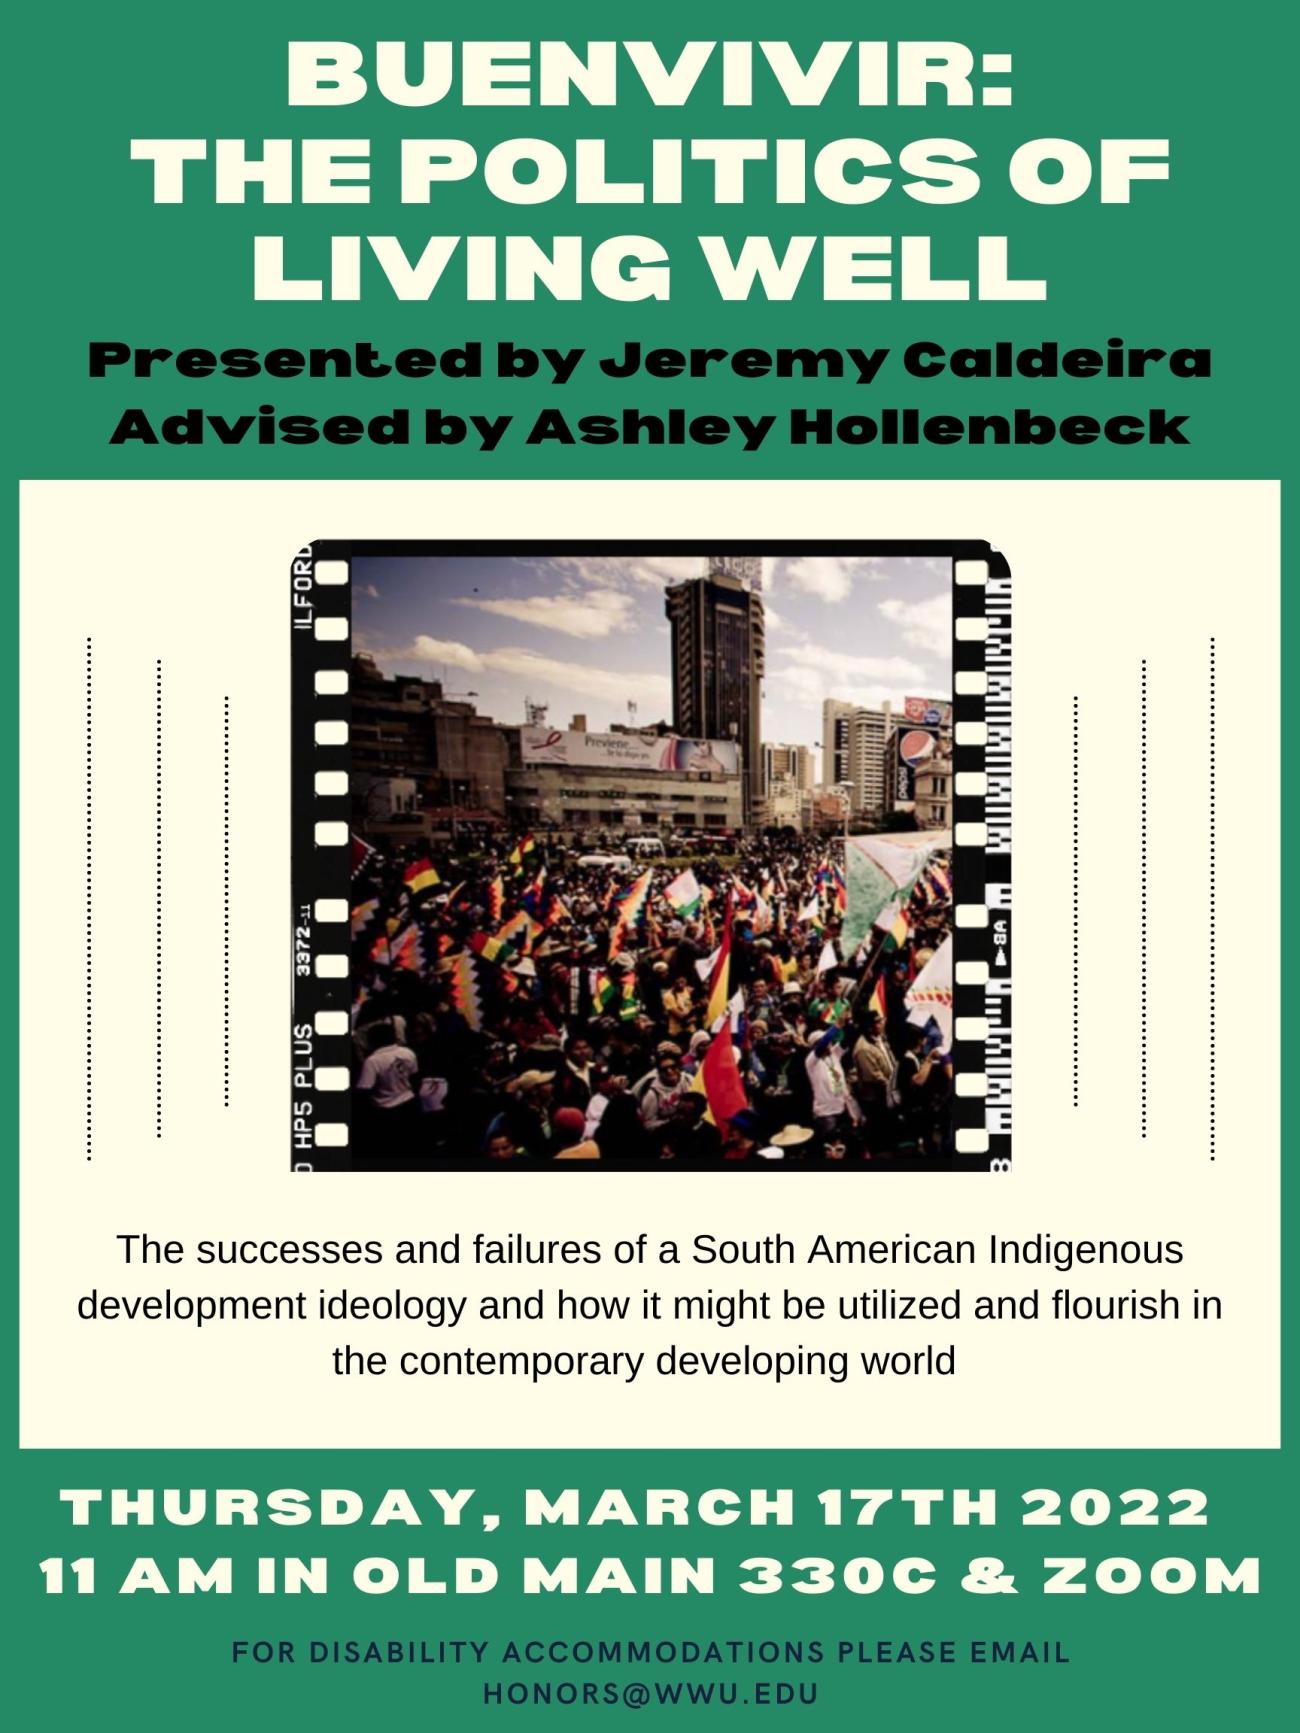 A green poster with a white box outlining a picture of protestors in a city square waving multi-colored flags. The text reads: “Buenvivir: The Politics of Living Well. Presented by Jeremy Caldeira. Advised by Ashley Hollenbeck. The successes and failures of a South American Indigenous development ideology and how it might be utilized and flourish in the contemporary developing world. On Thursday, March 17th 2022 at 11 AM in Old Main 330C and on zoom. For disability accommodations email honors@wwu.edu.”